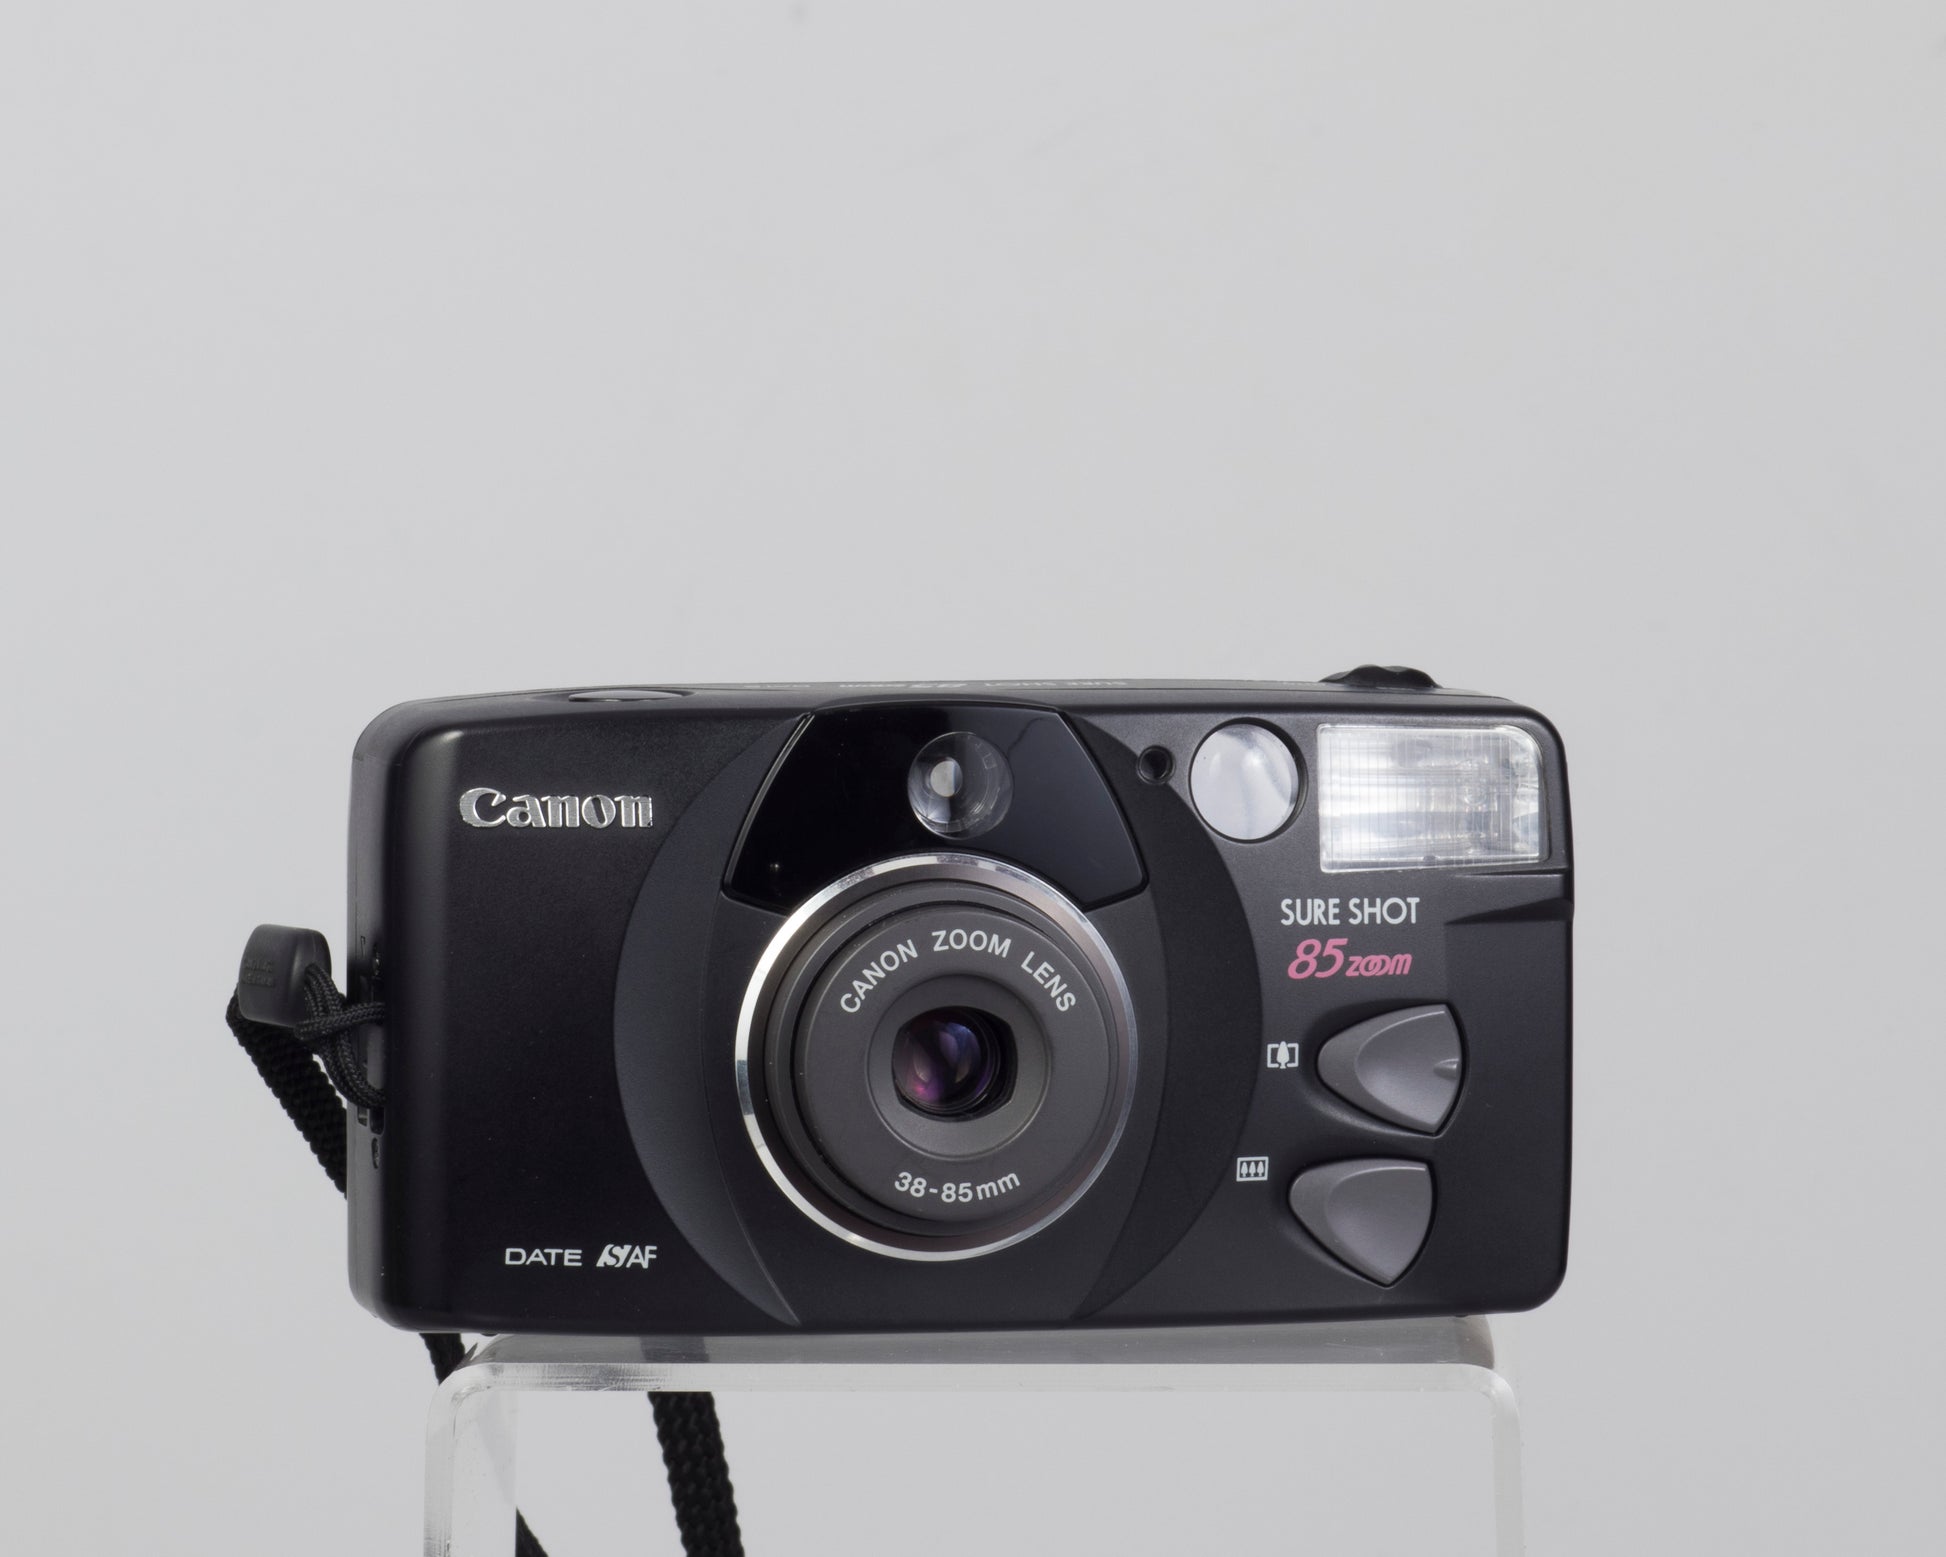 The Canon Sure Shot 85 Zoom Date is a high quality 35mm film point-and-shoot camera from the late 1990s.